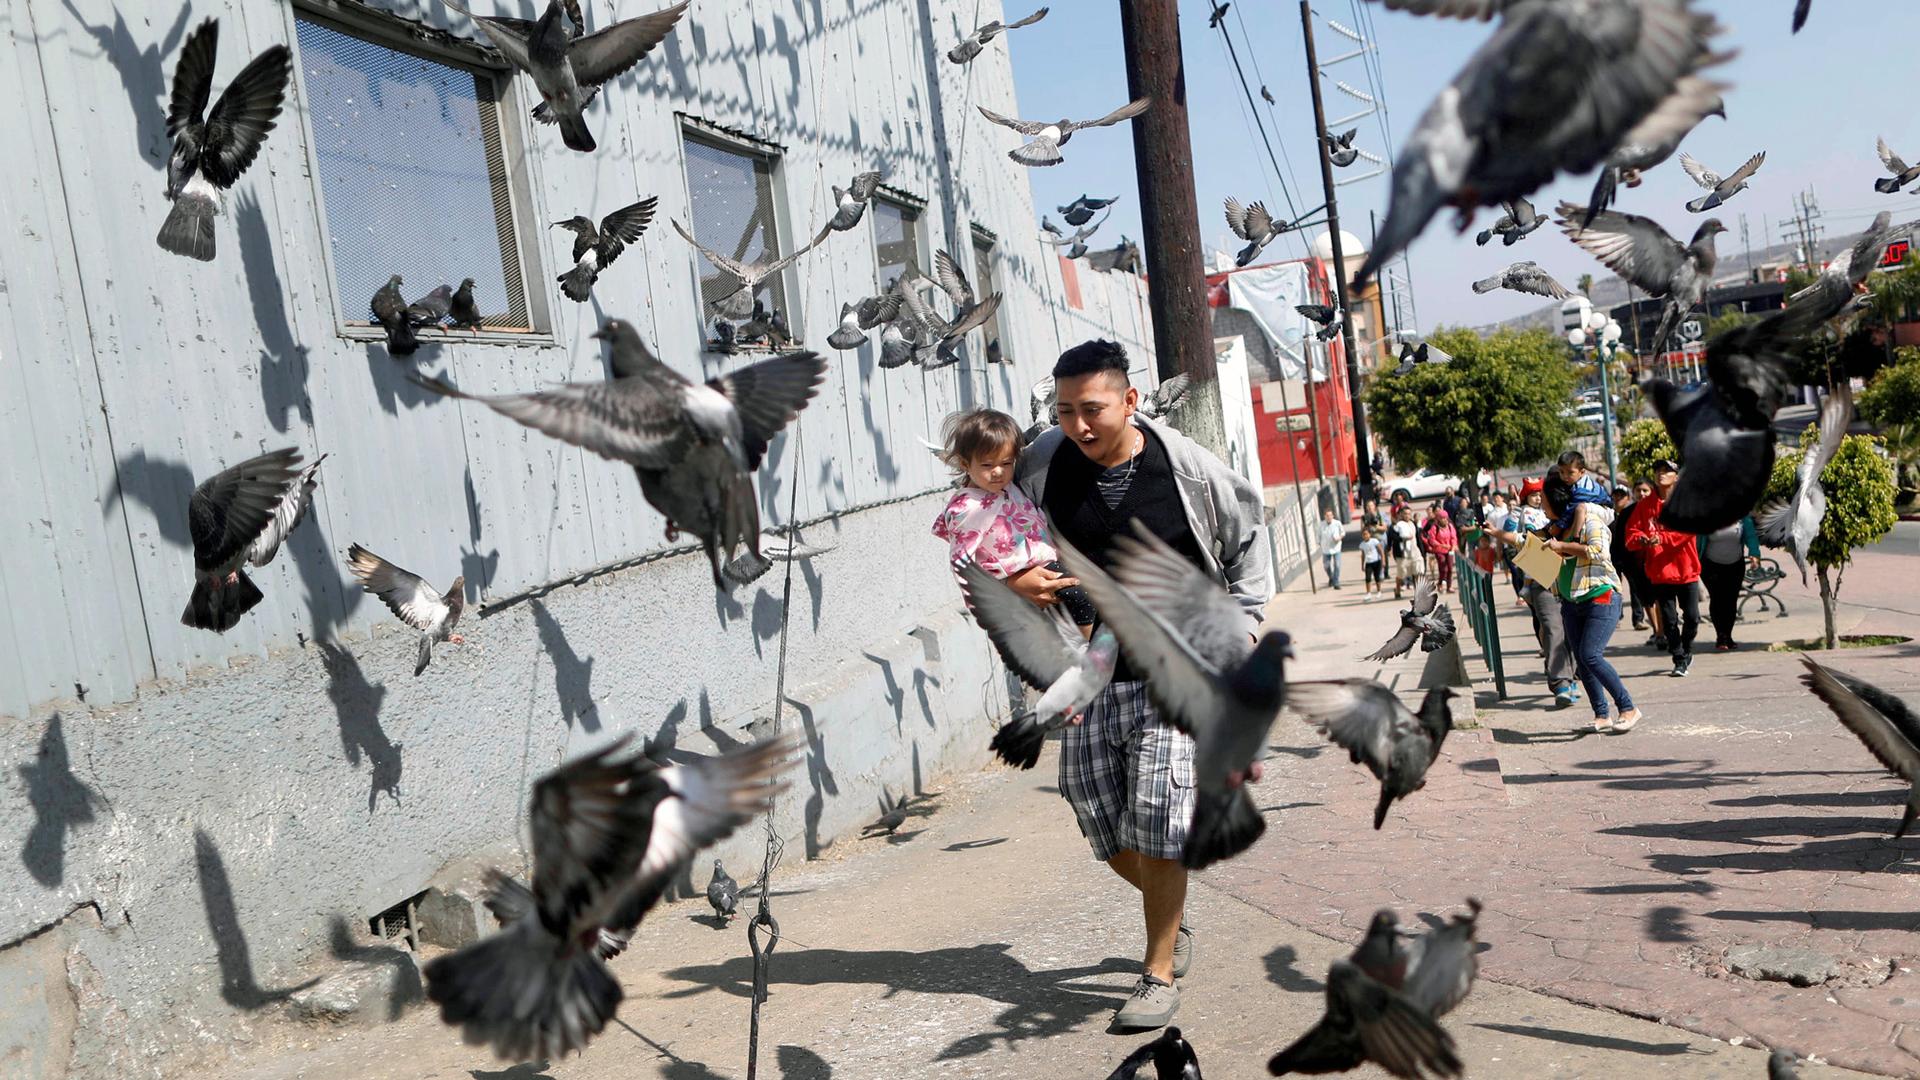 Dozens of pigeons surround a man holding a small girl in his arms.